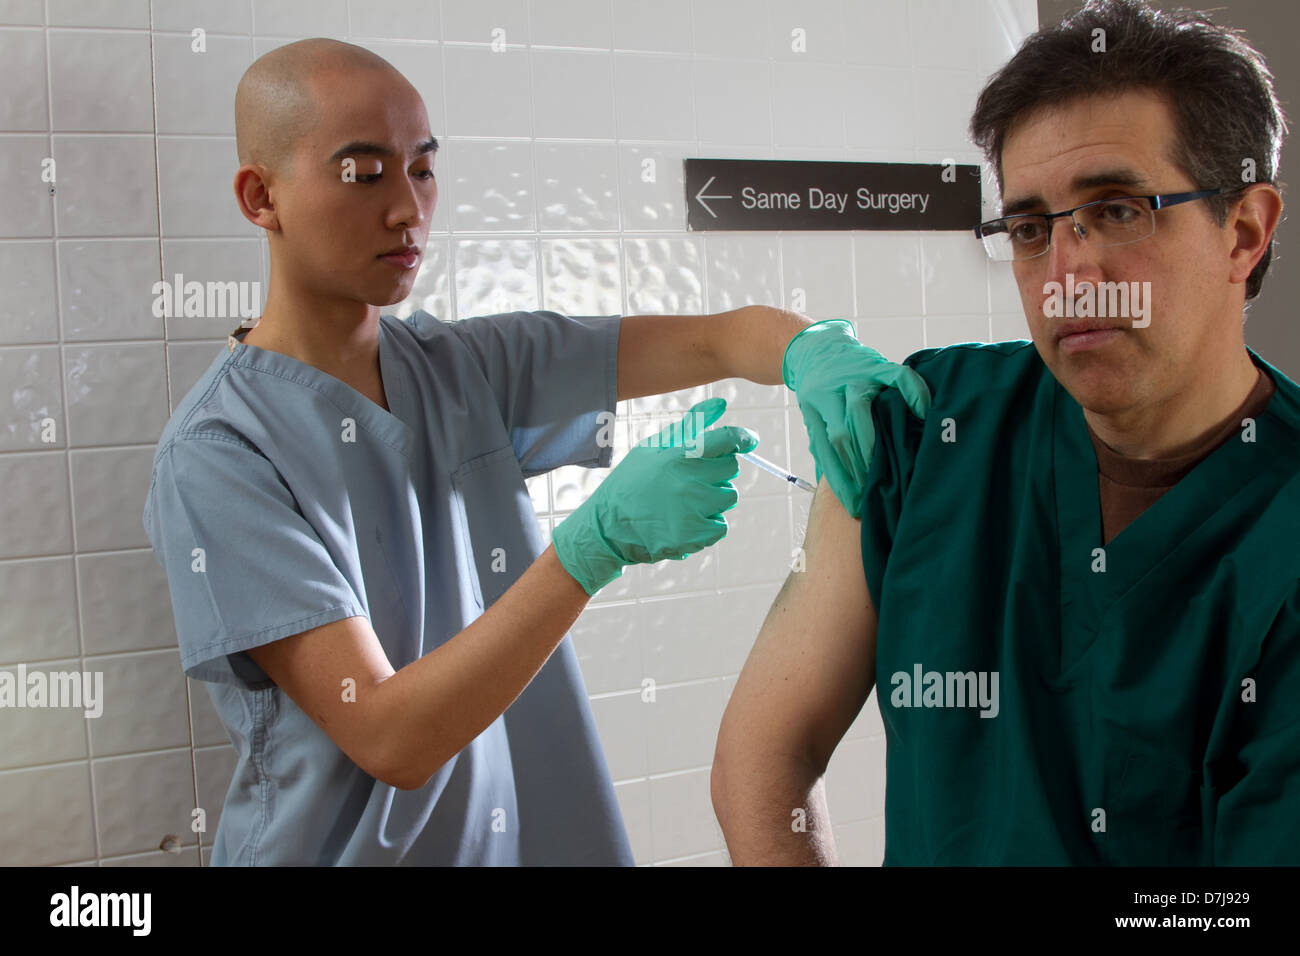 Health care professional administering vaccination to fellow staff member Stock Photo